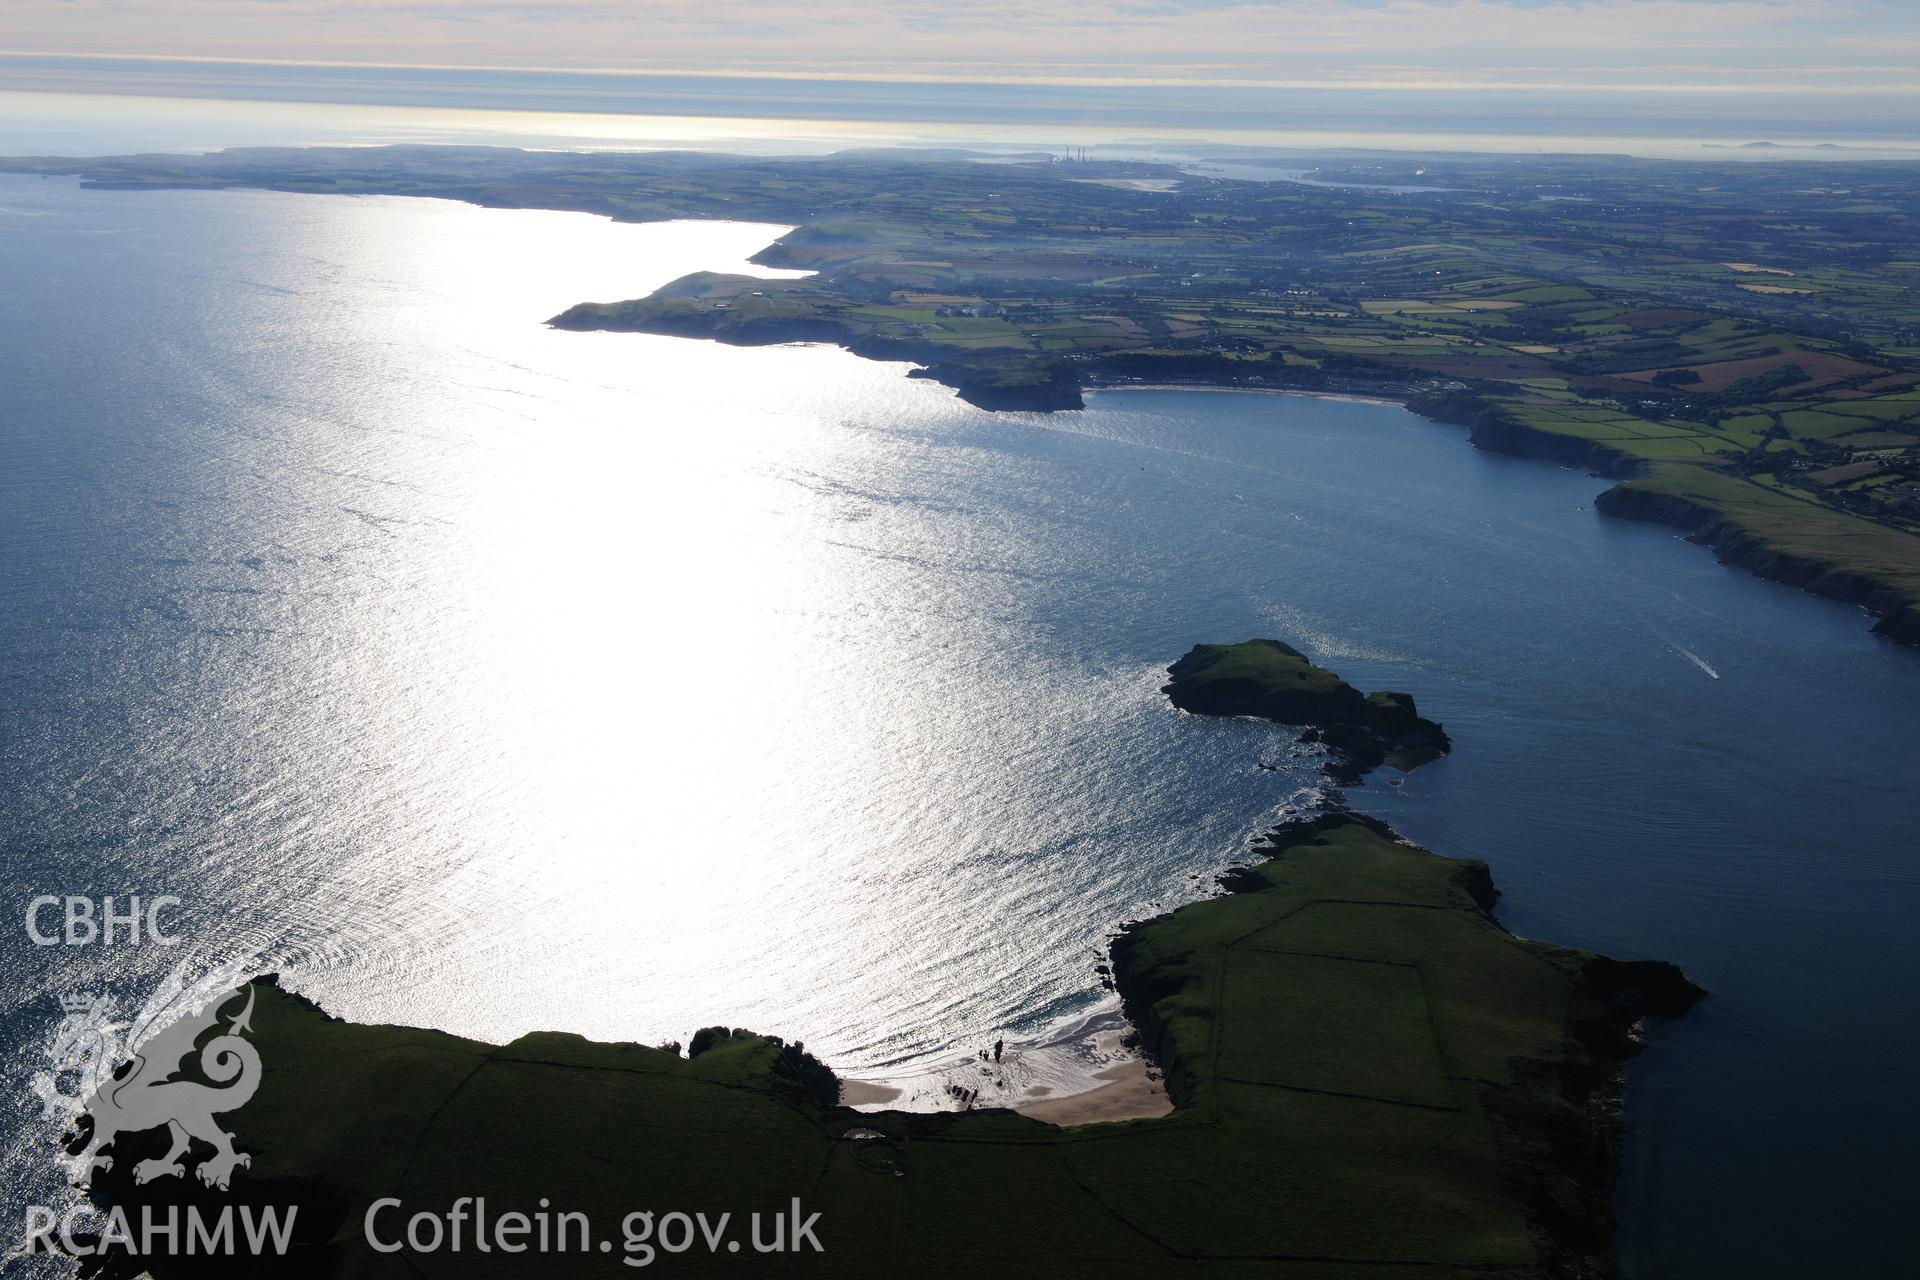 RCAHMW colour oblique photograph of Caldey Island, evening landscape west towards Lydstep. Taken by Toby Driver on 24/07/2012.